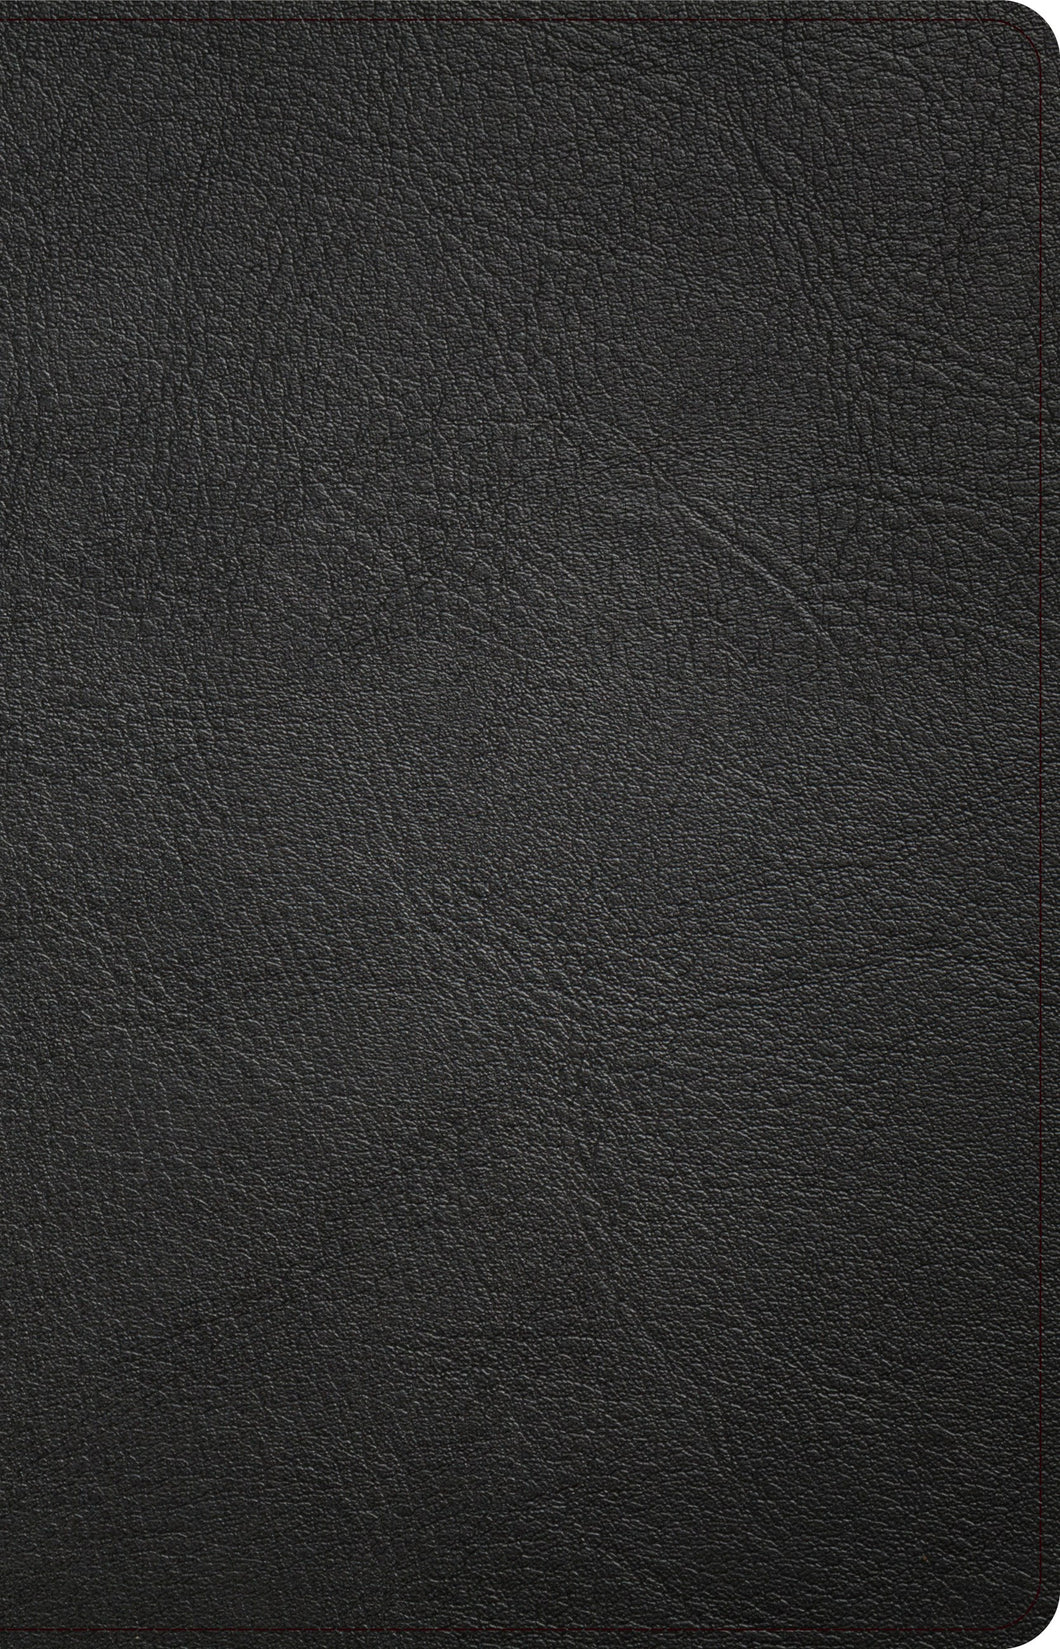 CSB Thinline Reference Bible-Black Genuine Leather